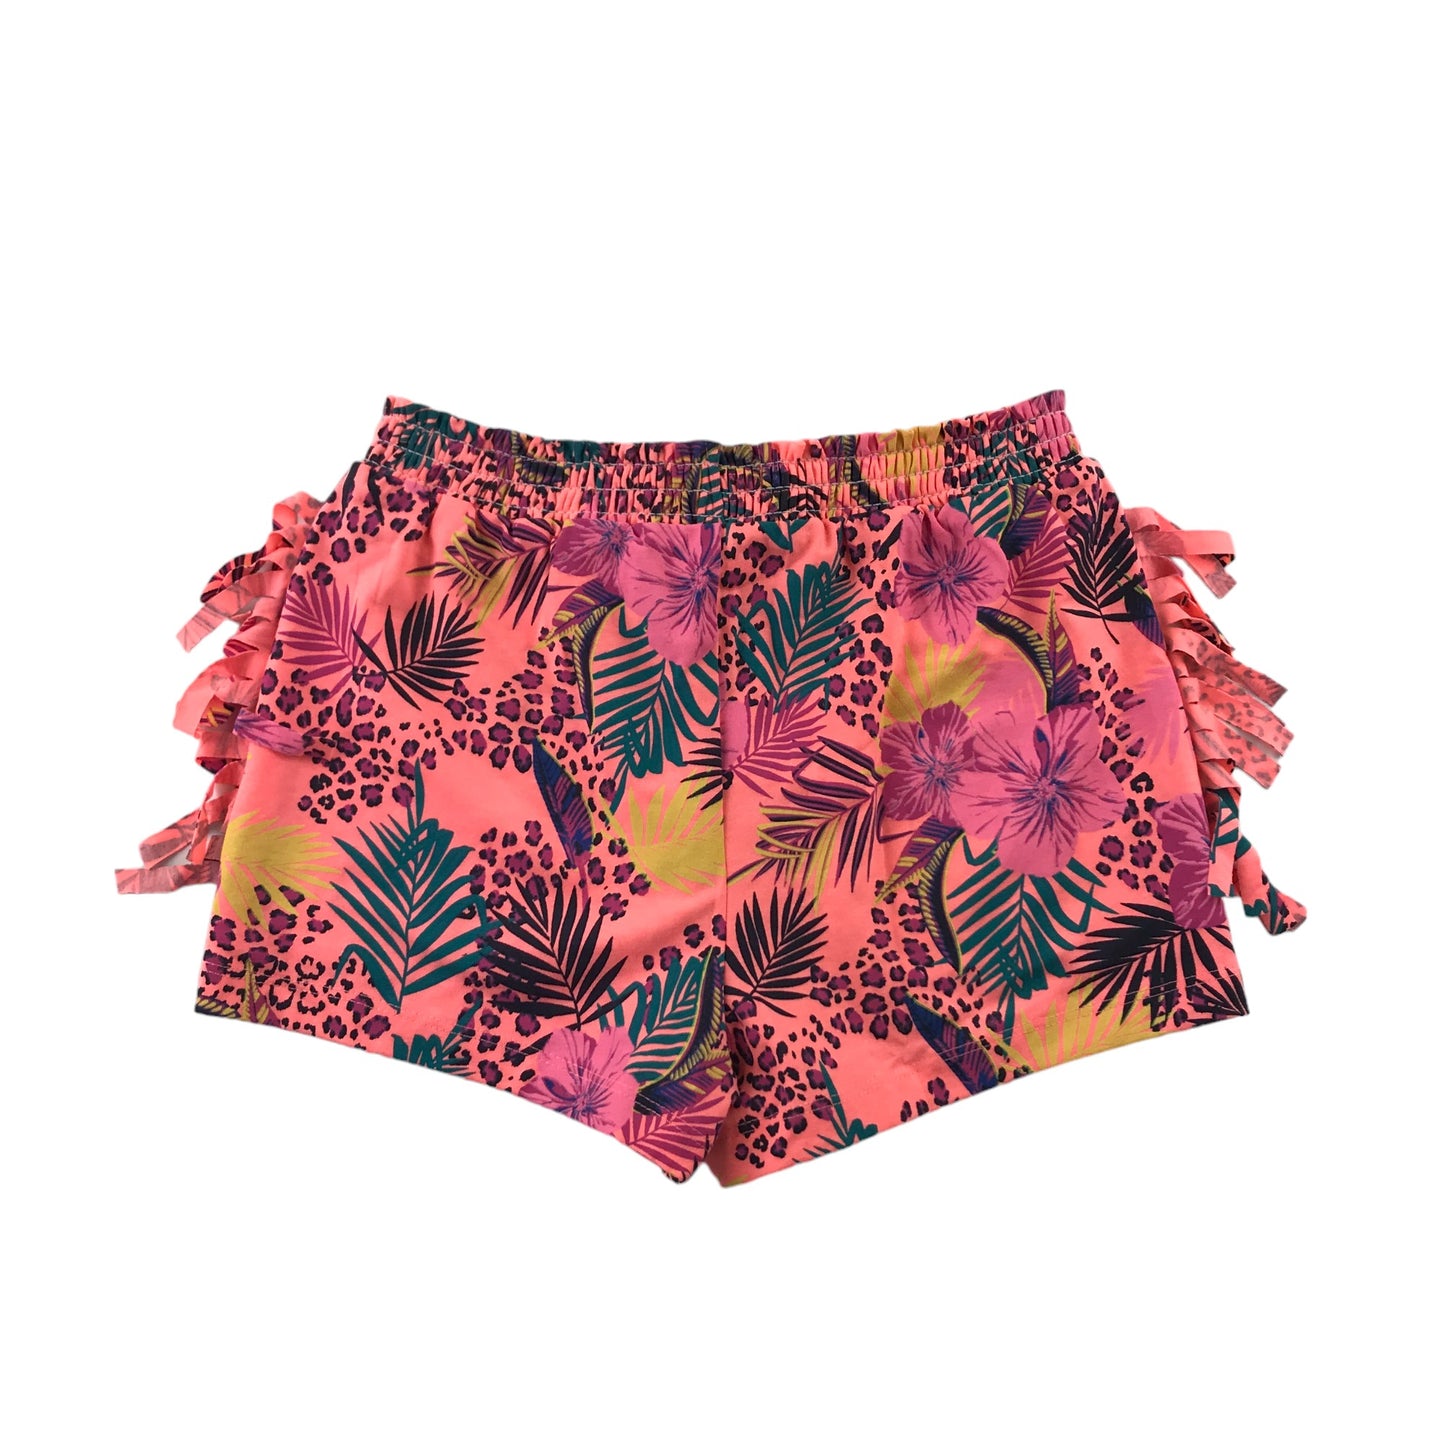 Bluezoo Shorts Age 9 Pink Floral Print with Leopard Spots Print